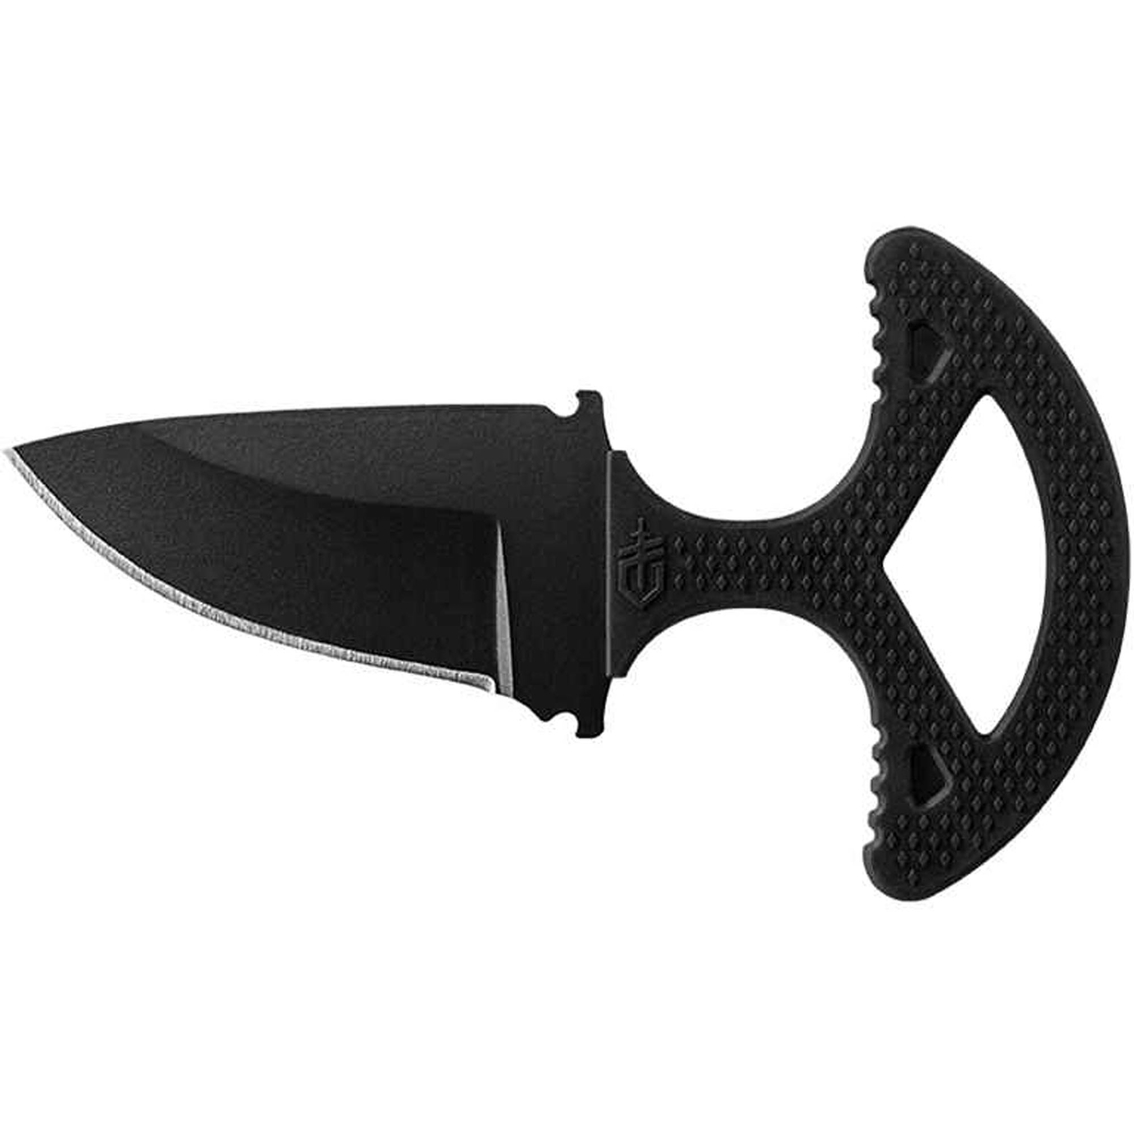 Gerber Knives and Tools Ghostrike Punch Knife